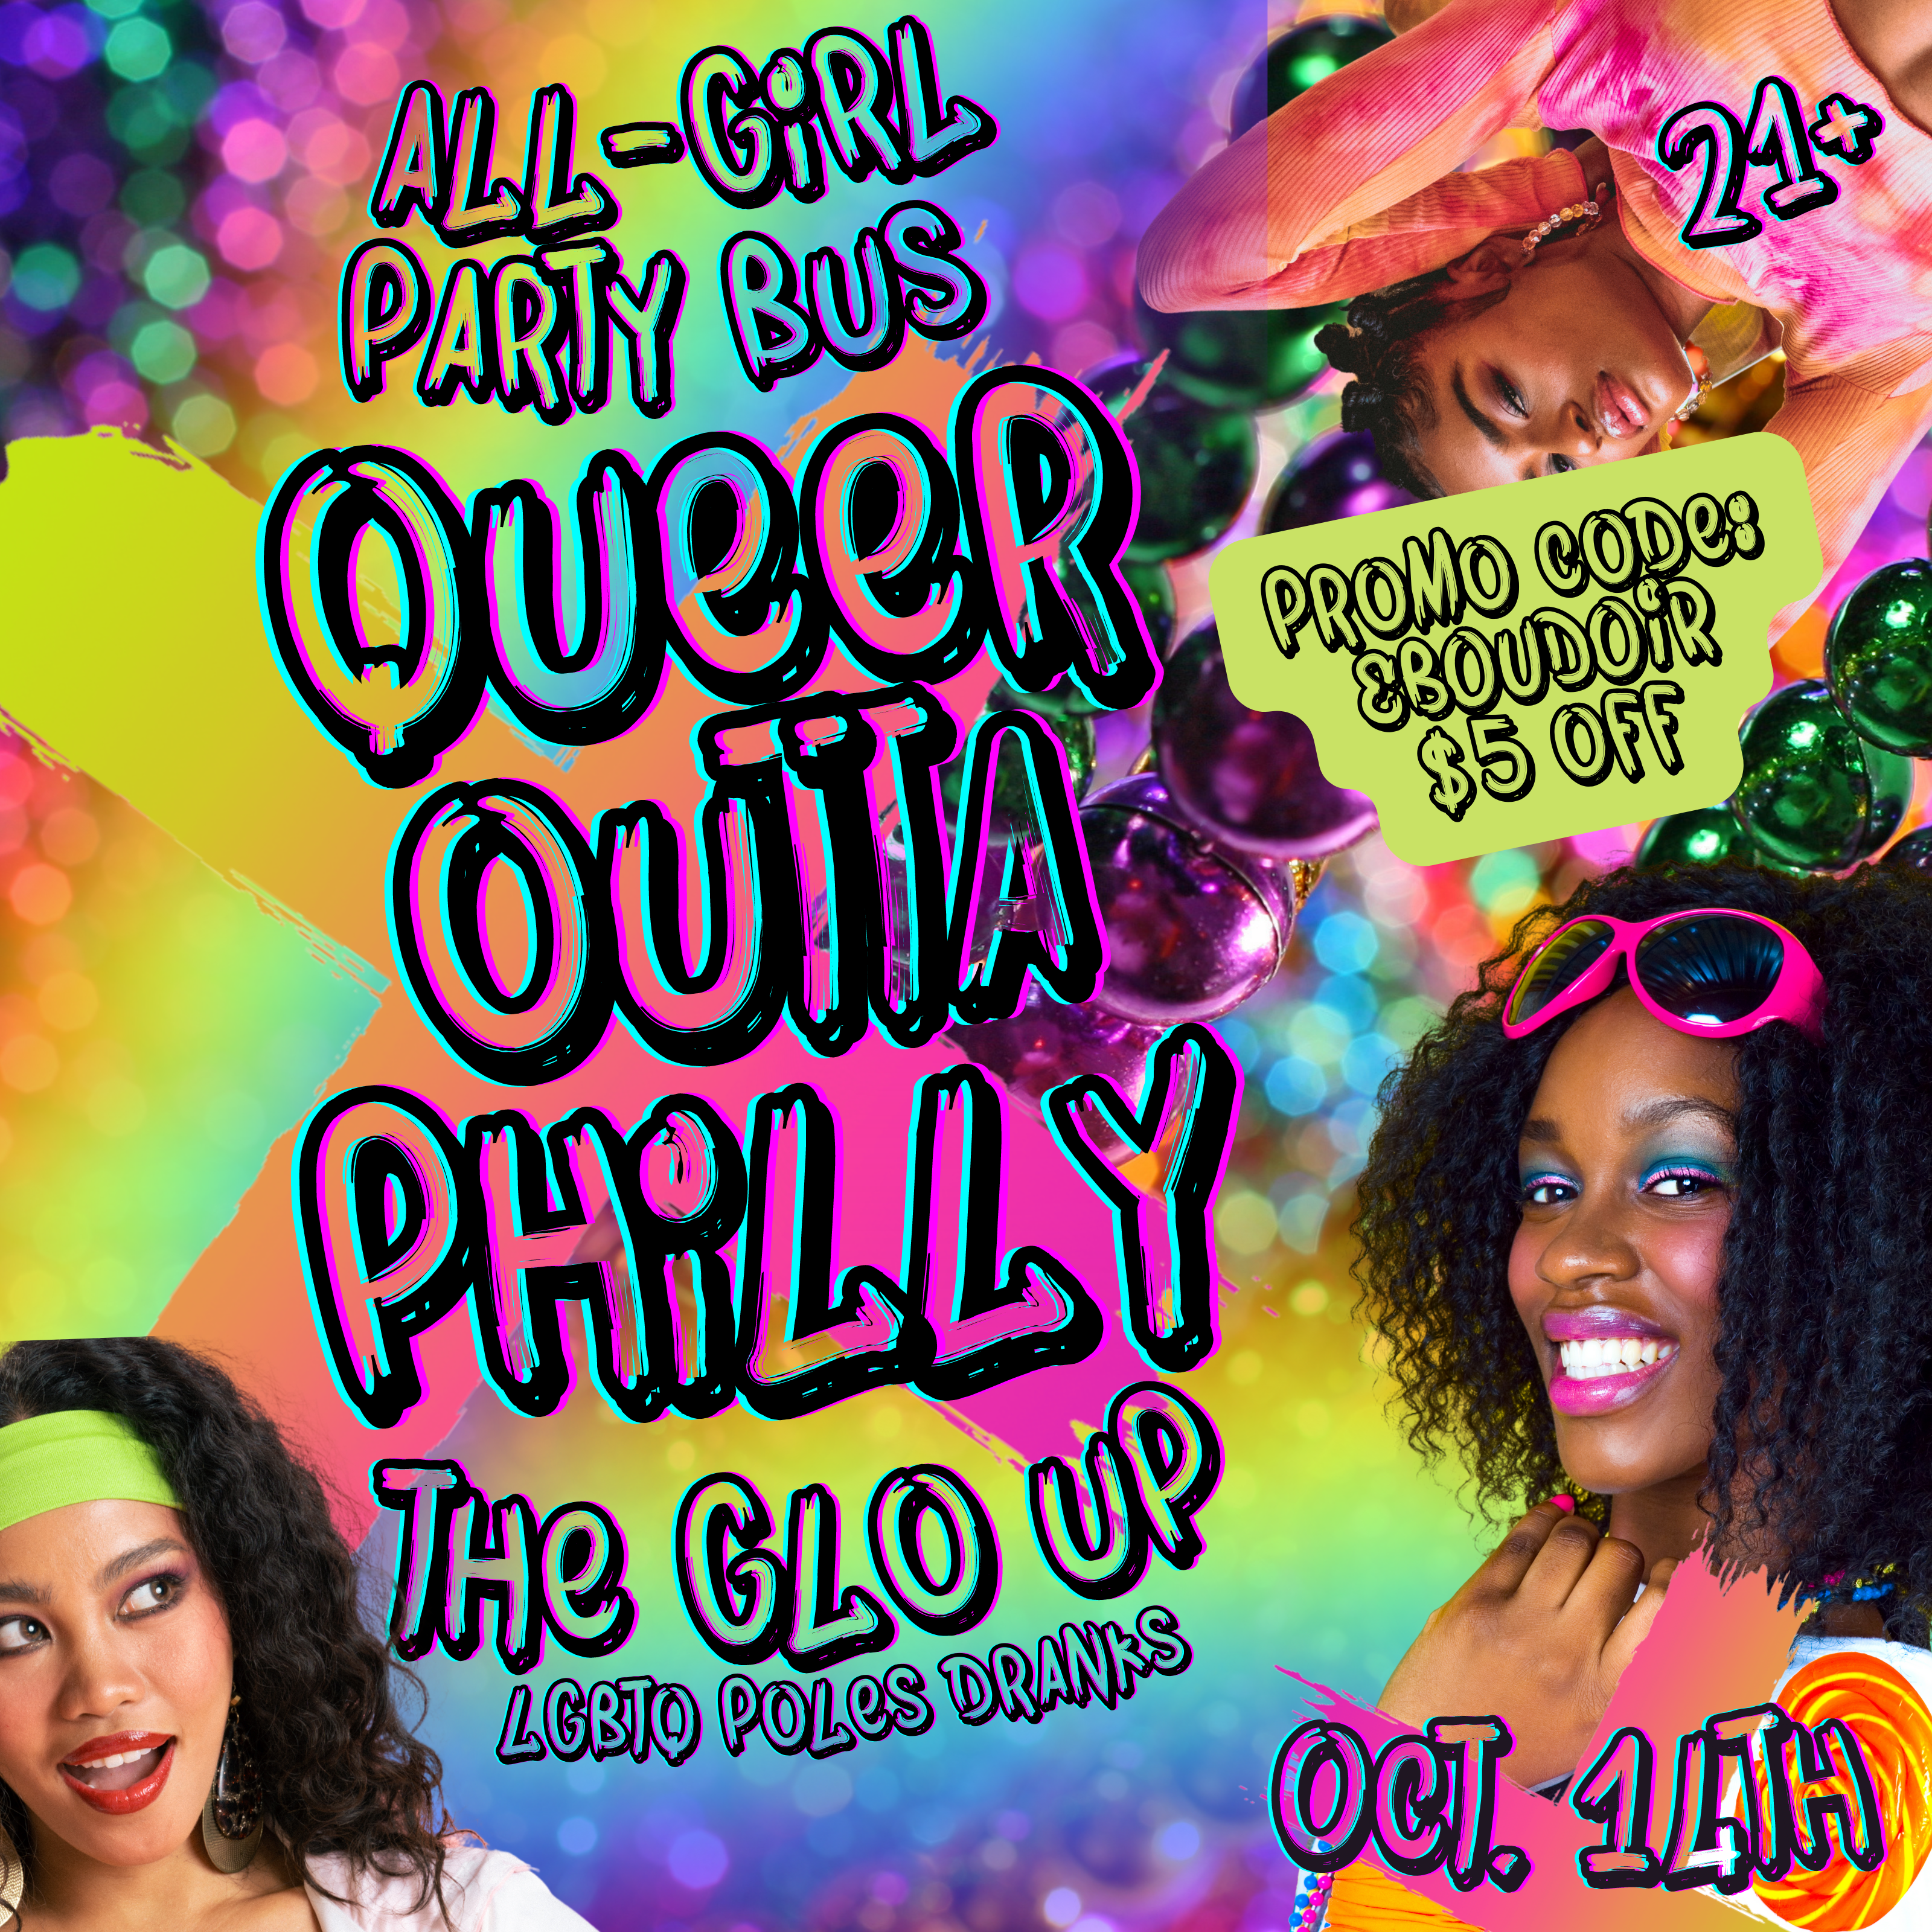 The Tri-State’s Favorite ALL-GIRL PARTY BUS, Queer Outta Philly, Returns for National Coming Out Day!